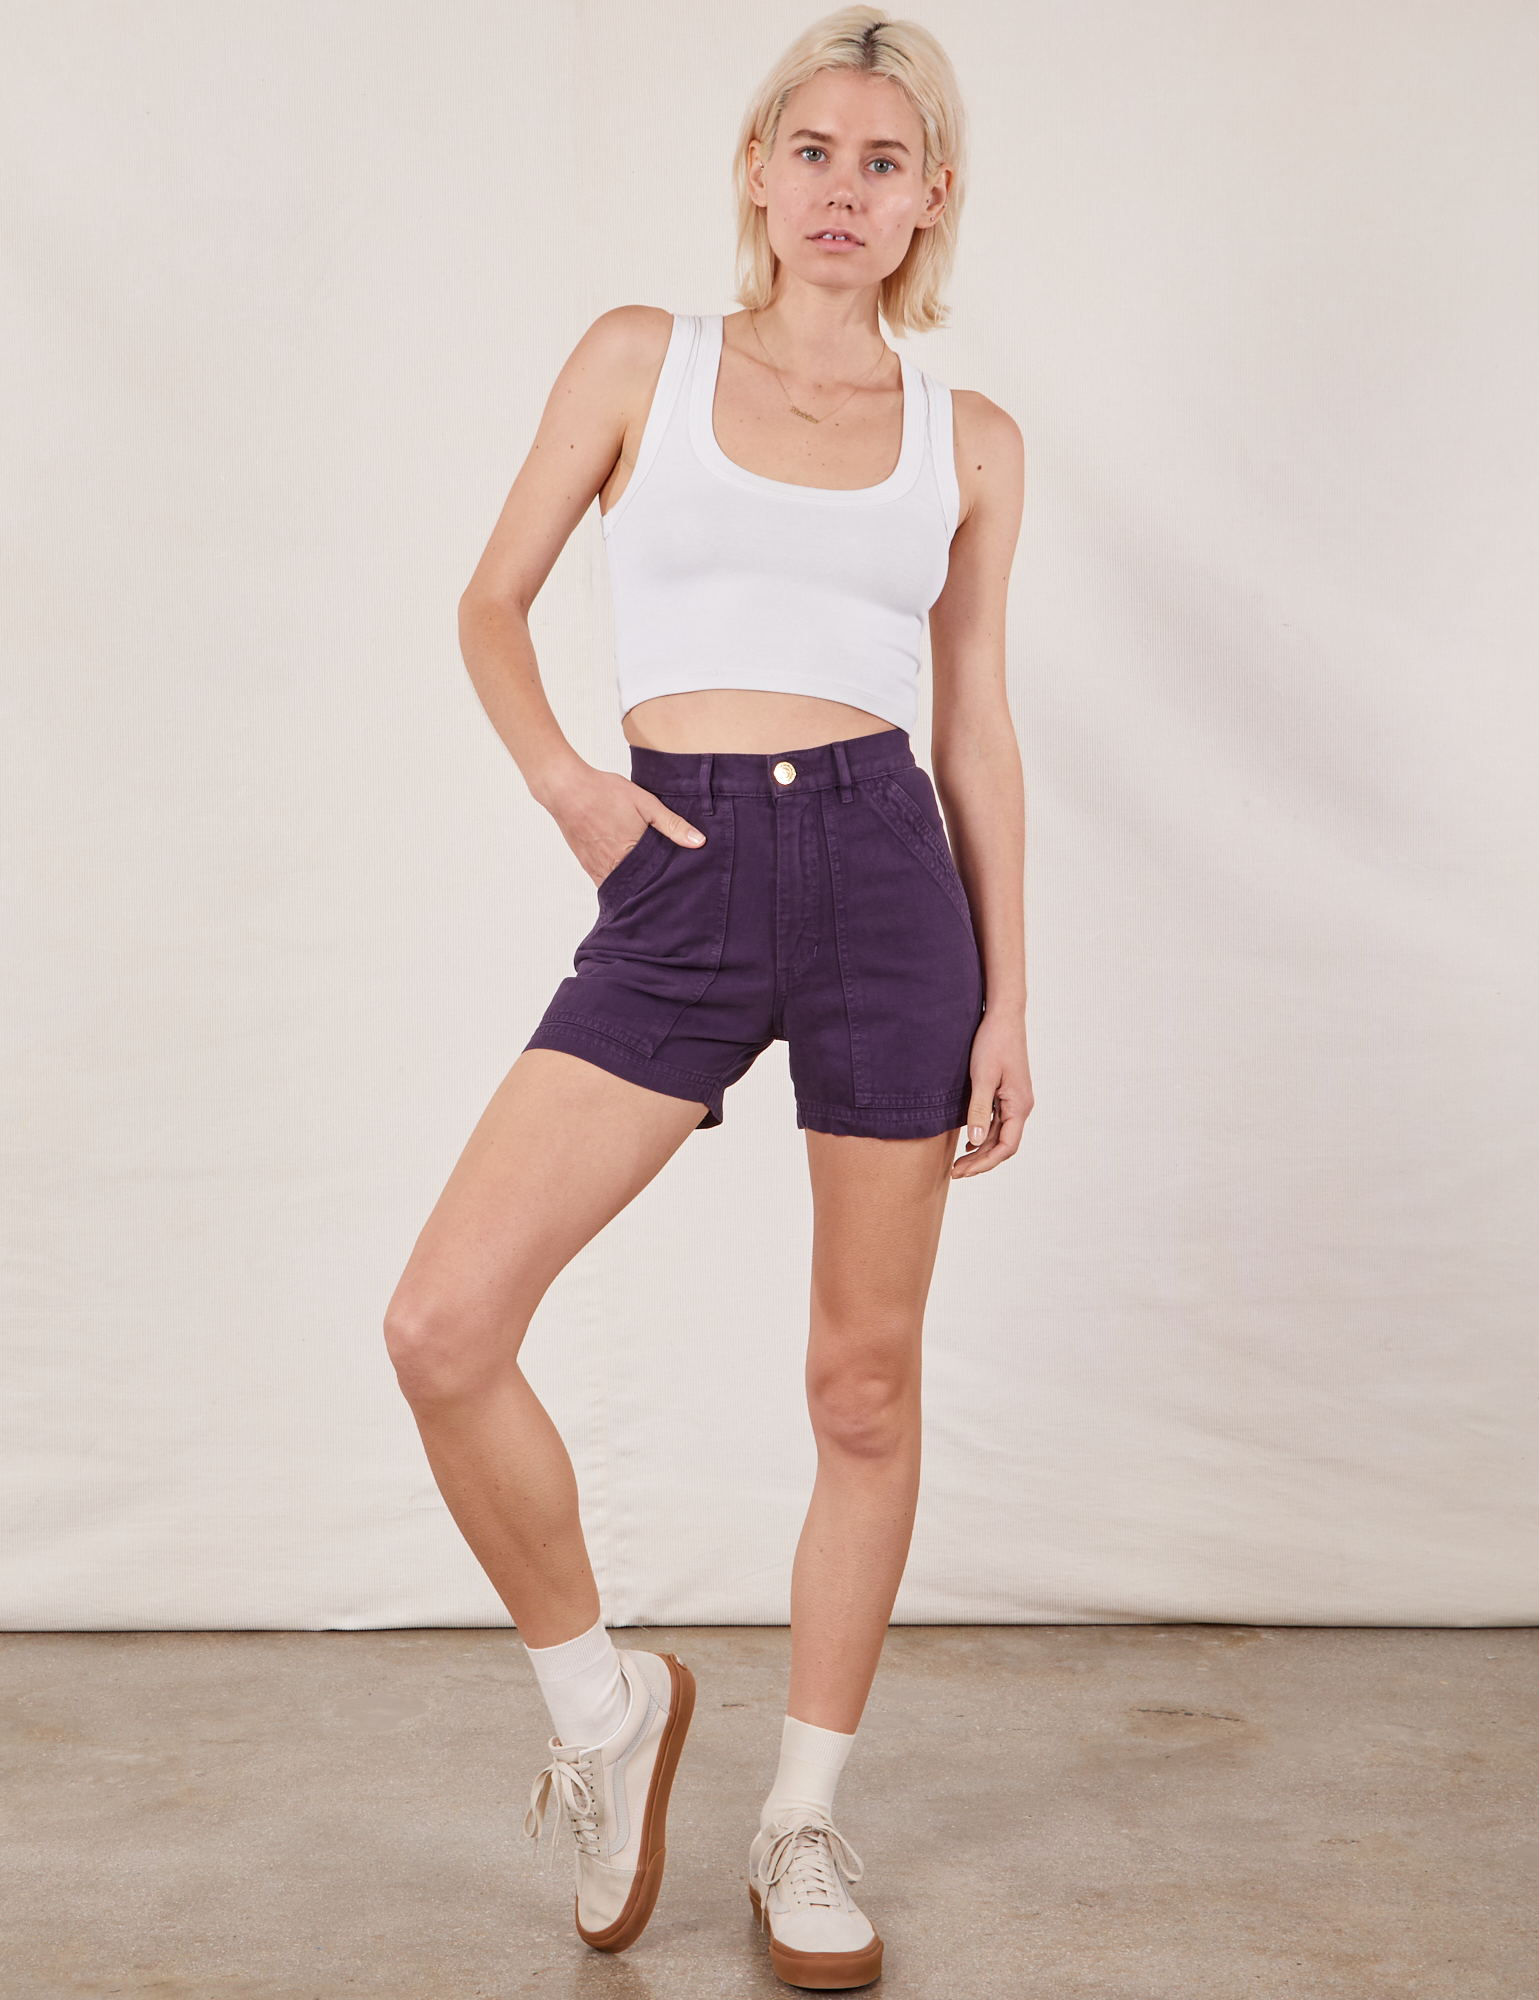 Madeline is 5’9” and wearing XXS Classic Work Shorts in Nebula Purple paired with Cropped Tank Top in vintage tee off-white